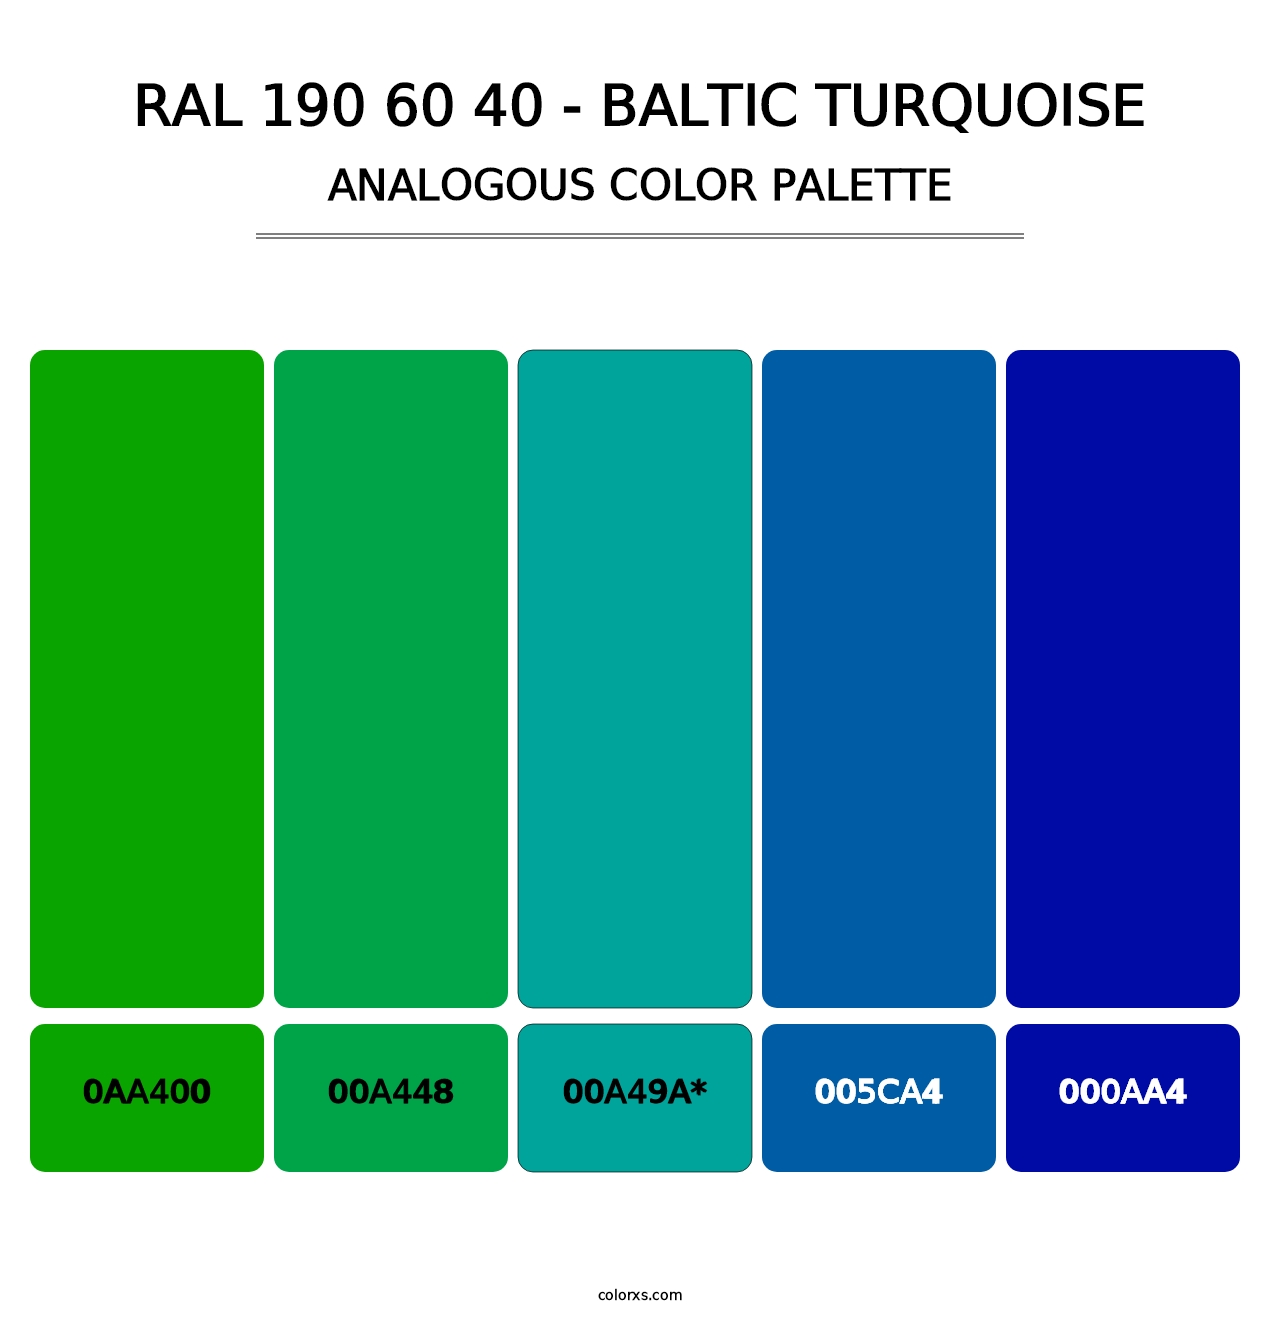 RAL 190 60 40 - Baltic Turquoise - Analogous Color Palette